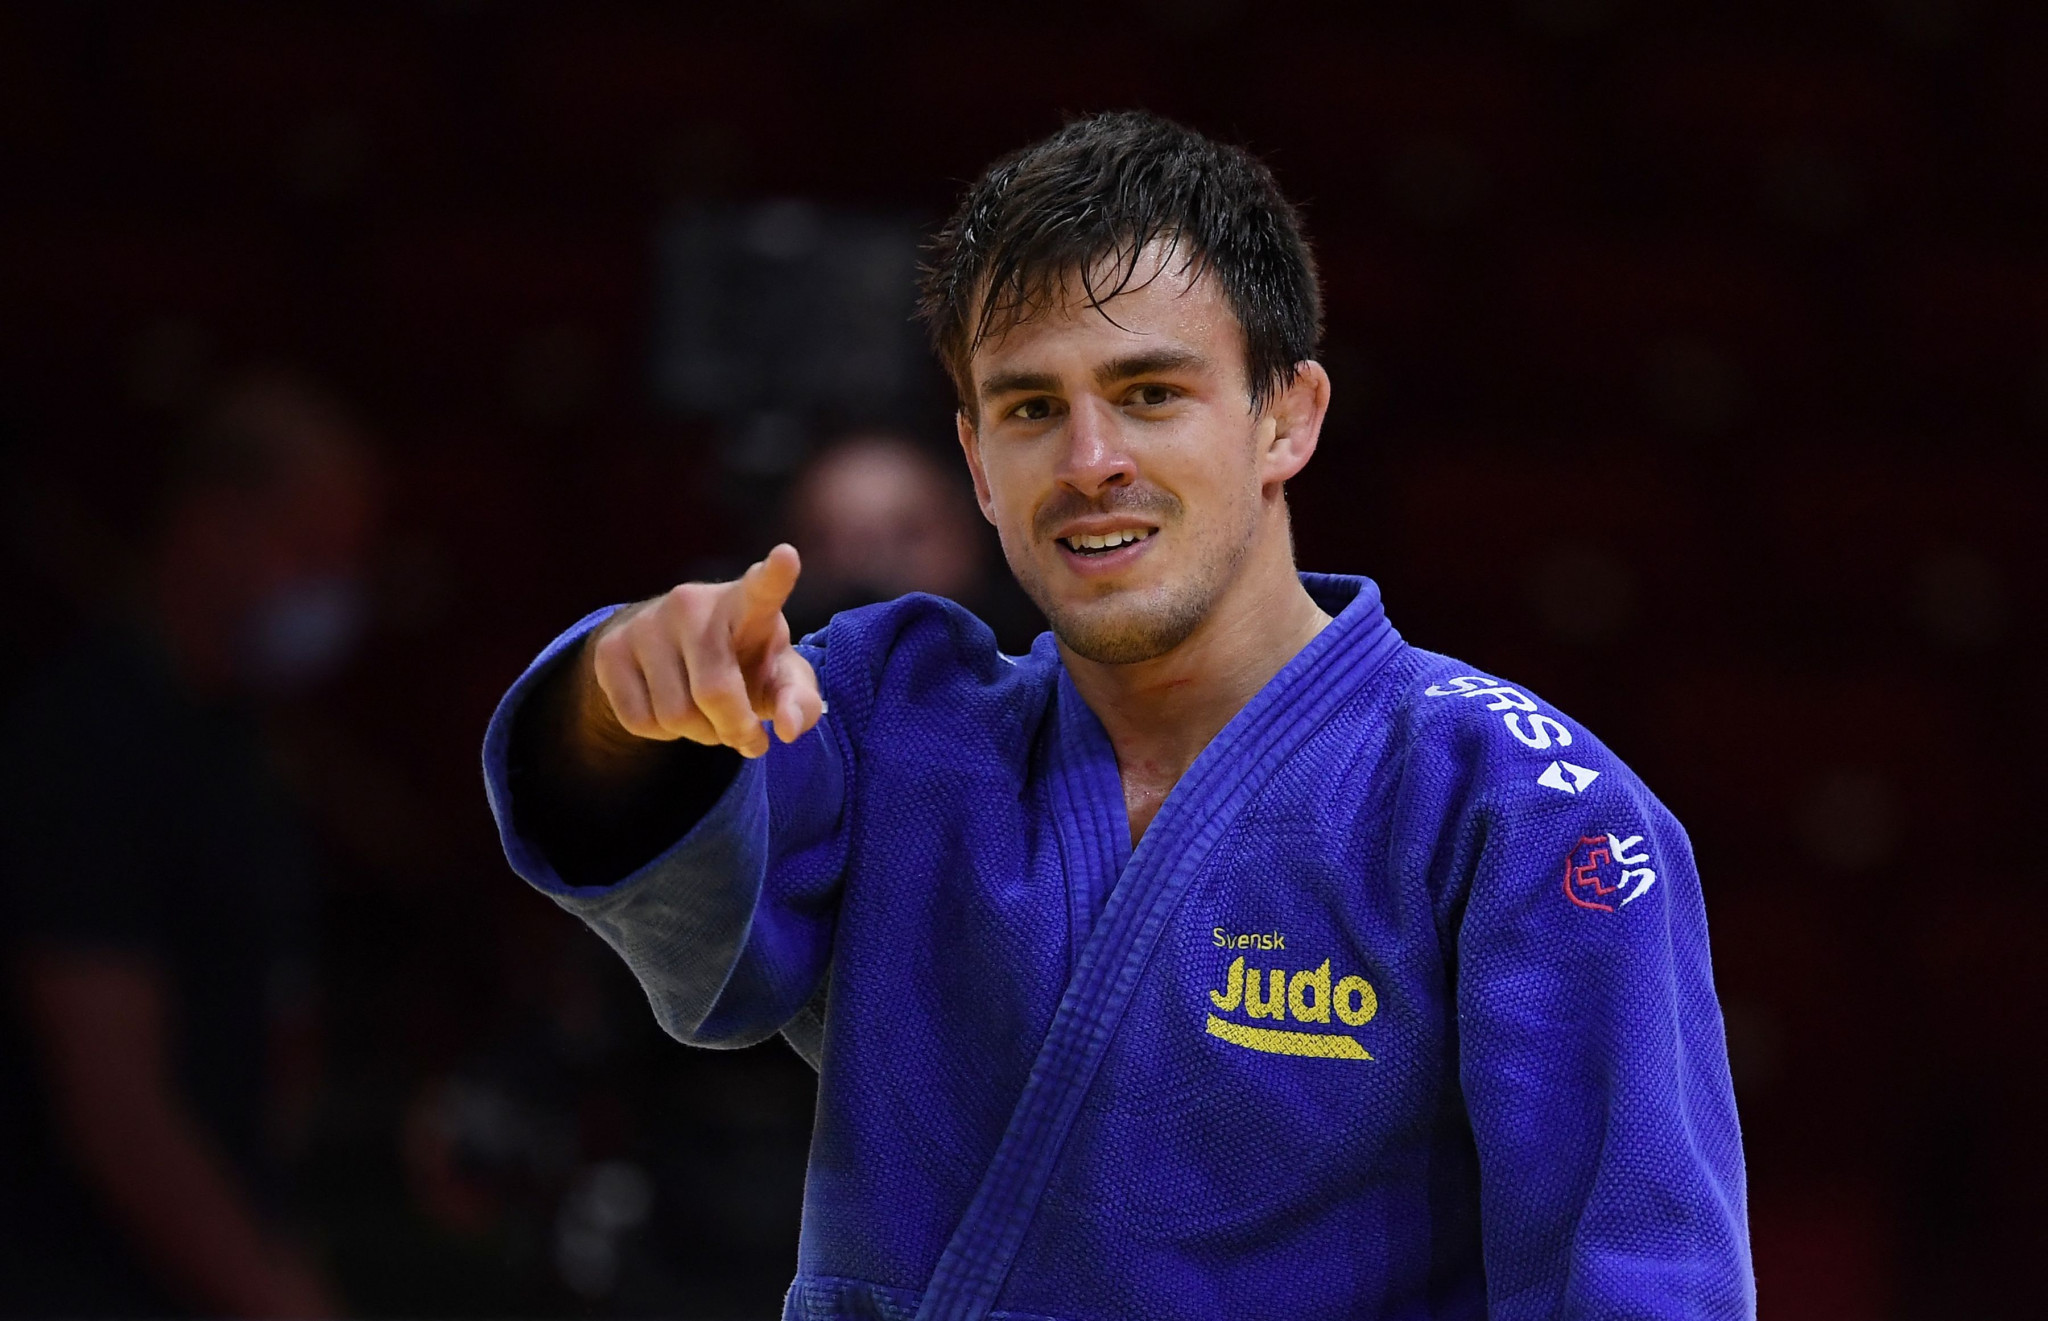 World silver medallist Macias quits judo after disagreement with National Federation